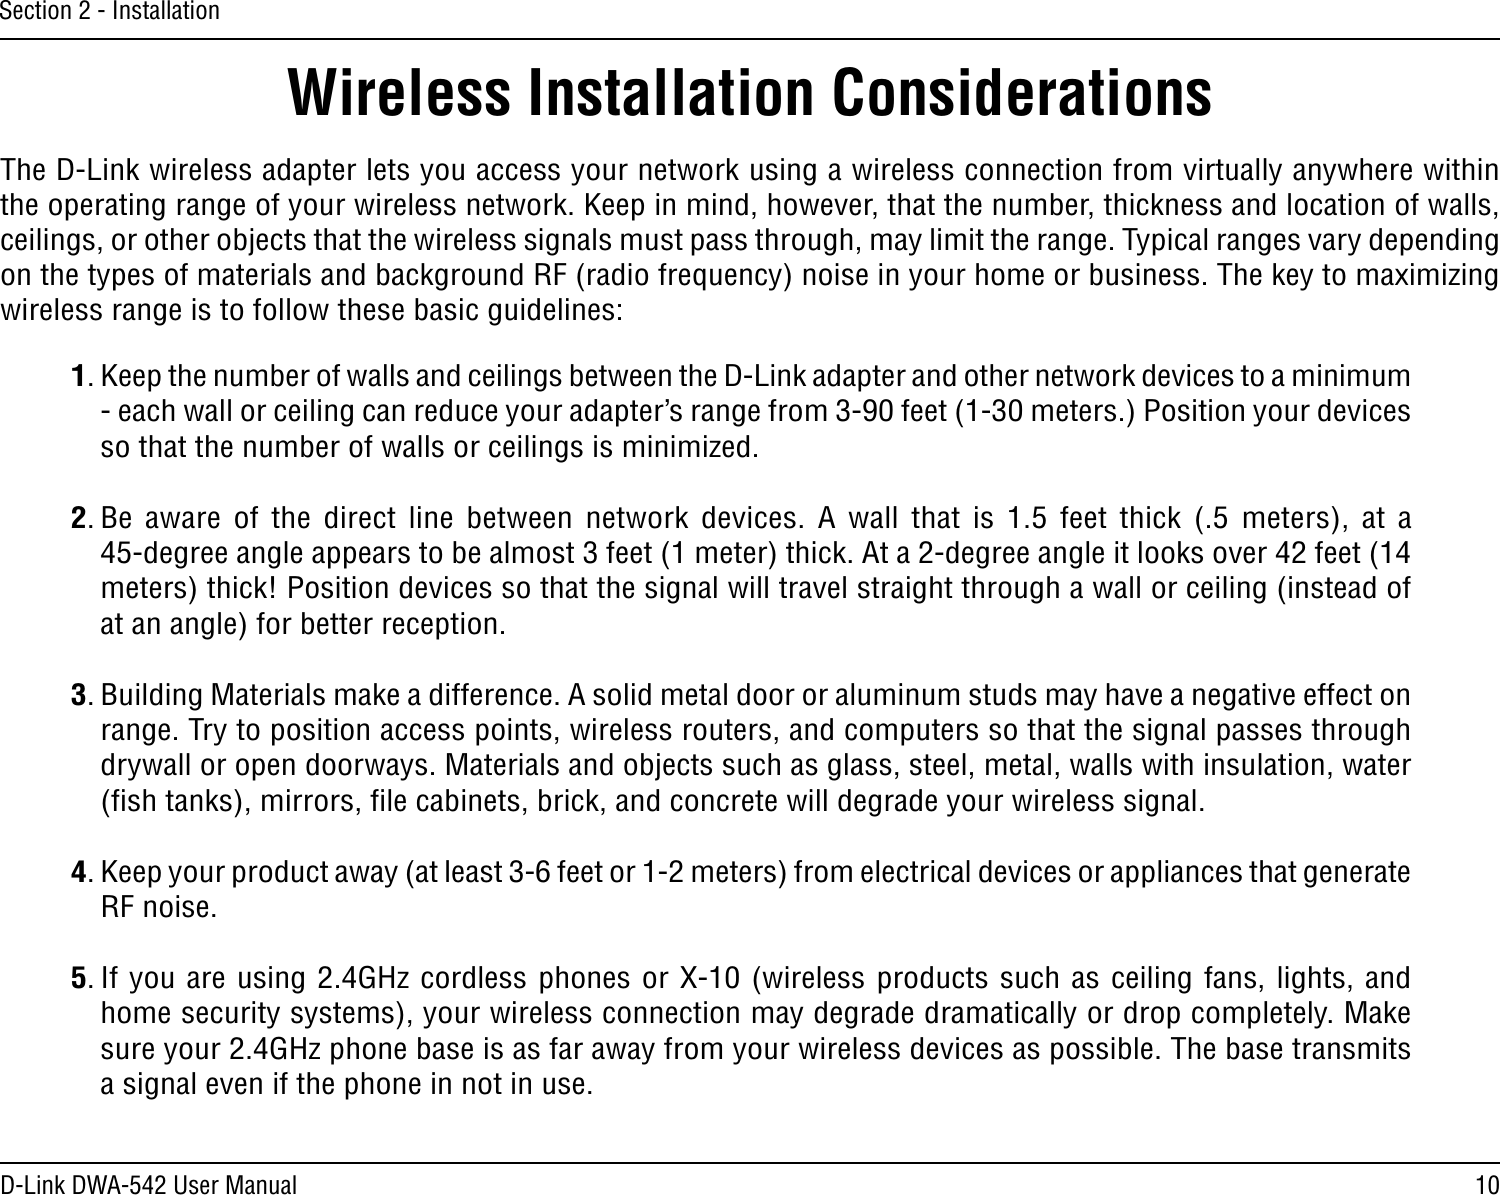 10D-Link DWA-542 User ManualSection 2 - InstallationWireless Installation ConsiderationsThe D-Link wireless adapter lets you access your network using a wireless connection from virtually anywhere within the operating range of your wireless network. Keep in mind, however, that the number, thickness and location of walls, ceilings, or other objects that the wireless signals must pass through, may limit the range. Typical ranges vary depending on the types of materials and background RF (radio frequency) noise in your home or business. The key to maximizing wireless range is to follow these basic guidelines:1. Keep the number of walls and ceilings between the D-Link adapter and other network devices to a minimum - each wall or ceiling can reduce your adapter’s range from 3-90 feet (1-30 meters.) Position your devices so that the number of walls or ceilings is minimized.2. Be  aware  of  the  direct  line  between network  devices.  A  wall  that  is  1.5 feet thick  (.5  meters),  at  a  45-degree angle appears to be almost 3 feet (1 meter) thick. At a 2-degree angle it looks over 42 feet (14 meters) thick! Position devices so that the signal will travel straight through a wall or ceiling (instead of at an angle) for better reception.3. Building Materials make a difference. A solid metal door or aluminum studs may have a negative effect on range. Try to position access points, wireless routers, and computers so that the signal passes through drywall or open doorways. Materials and objects such as glass, steel, metal, walls with insulation, water (ﬁsh tanks), mirrors, ﬁle cabinets, brick, and concrete will degrade your wireless signal.4. Keep your product away (at least 3-6 feet or 1-2 meters) from electrical devices or appliances that generate RF noise.5. If you are using 2.4GHz cordless phones or X-10 (wireless products such as ceiling fans, lights, and home security systems), your wireless connection may degrade dramatically or drop completely. Make sure your 2.4GHz phone base is as far away from your wireless devices as possible. The base transmits a signal even if the phone in not in use.